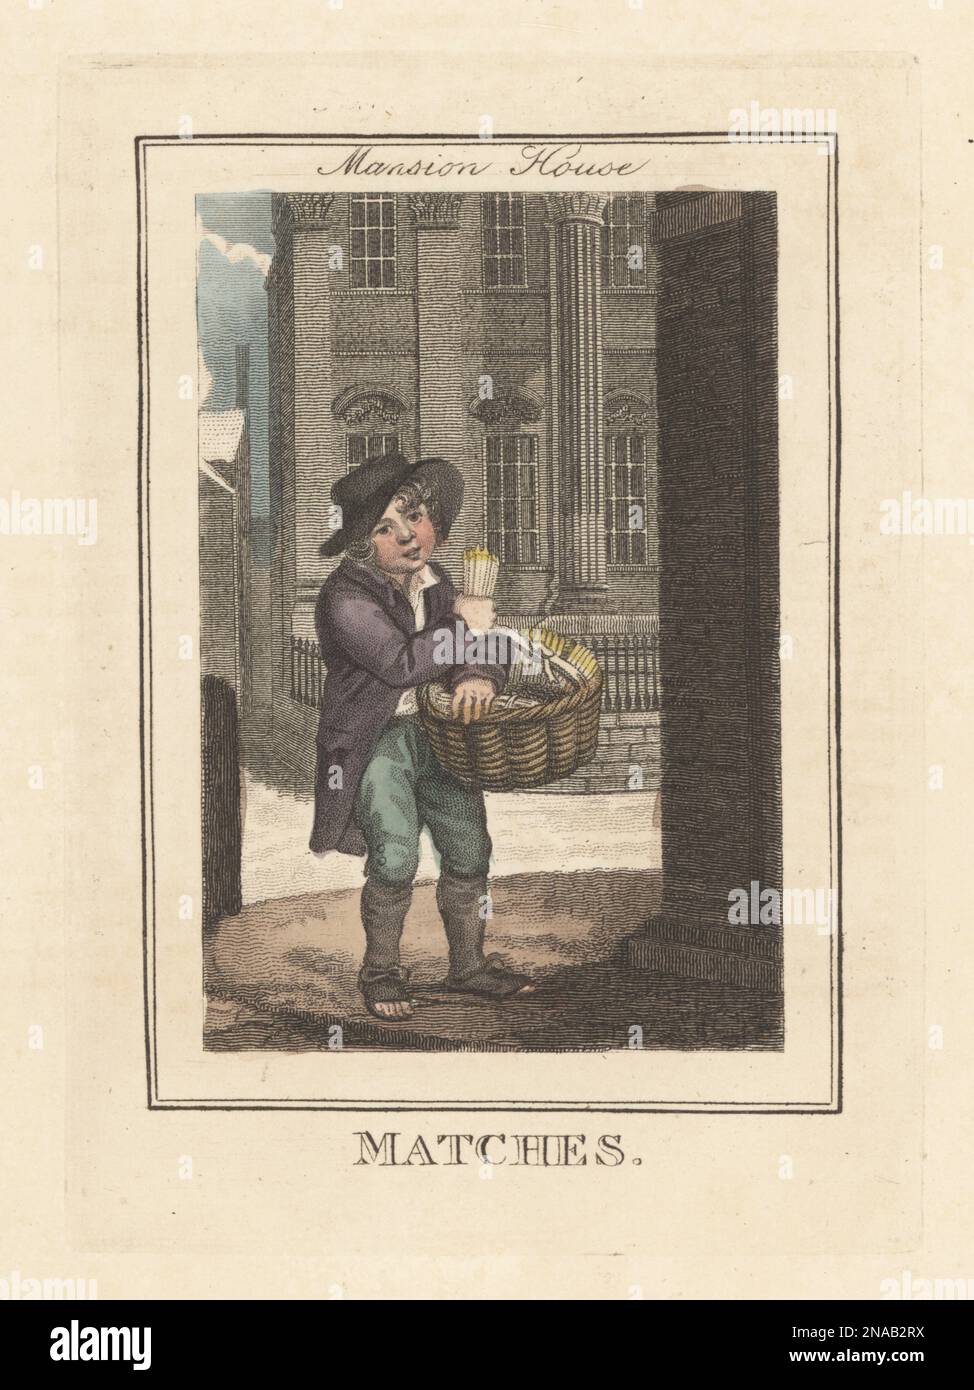 Boy selling matches in front of Mansion House. Matchseller in hat, coat, breeches and toe-less shoes with basket of matches. The Palladian-style Mantion House was designed by George Dance as the Lord Mayor's residence.  Handcoloured copperplate engraving by Edward Edwards after an illustration by William Marshall Craig from Description of the Plates Representing the Itinerant Traders of London, Richard Phillips, No. 71 St Paul’s Churchyard, London, 1805. Stock Photo